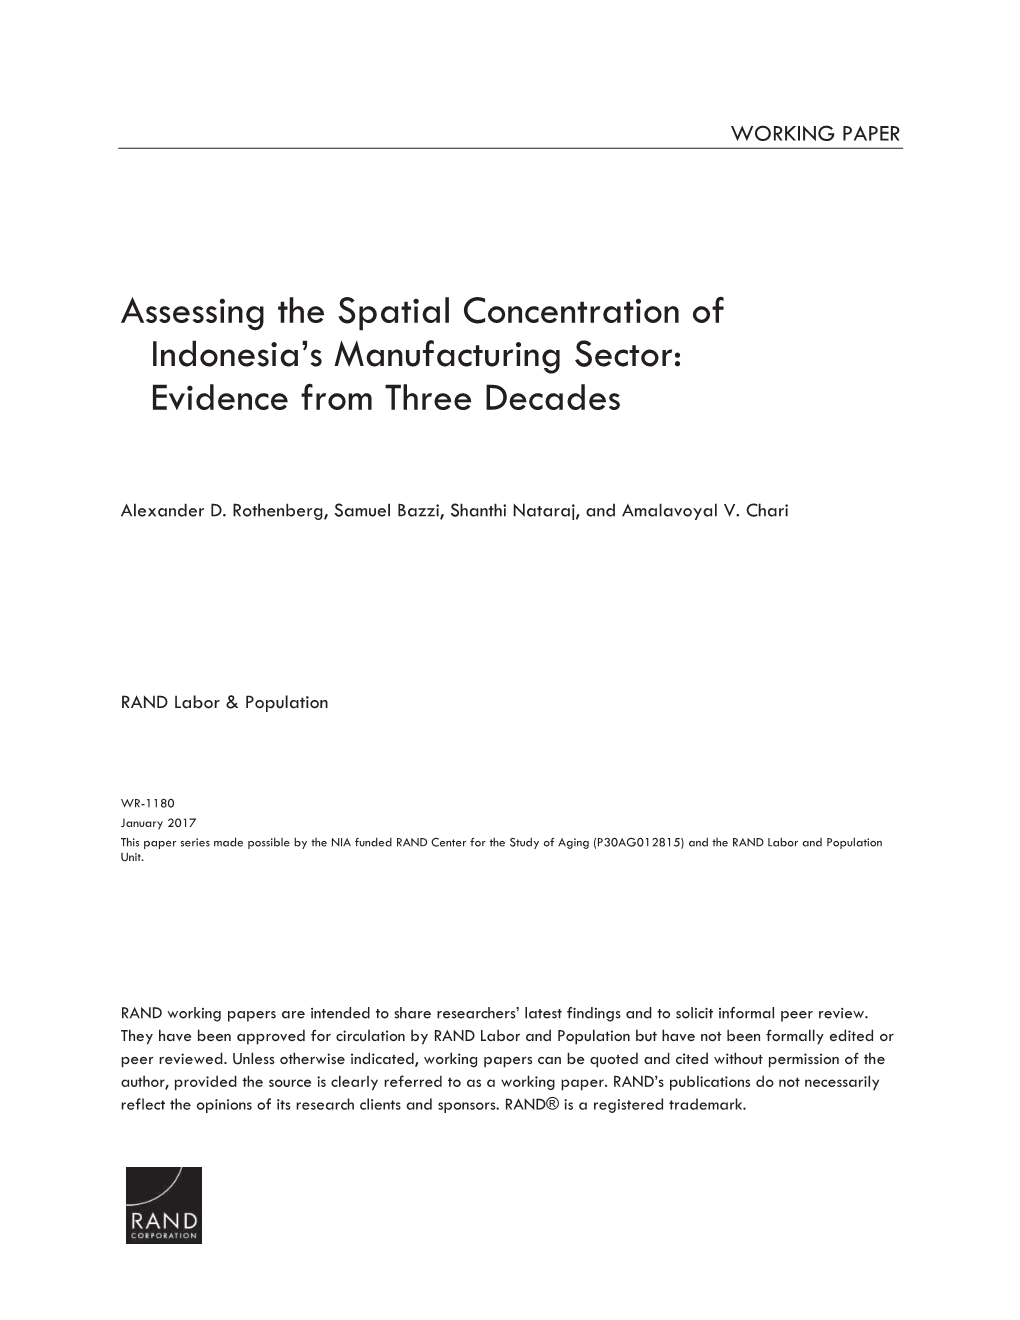 Assessing the Spatial Concentration of Indonesia's Manufacturing Sector